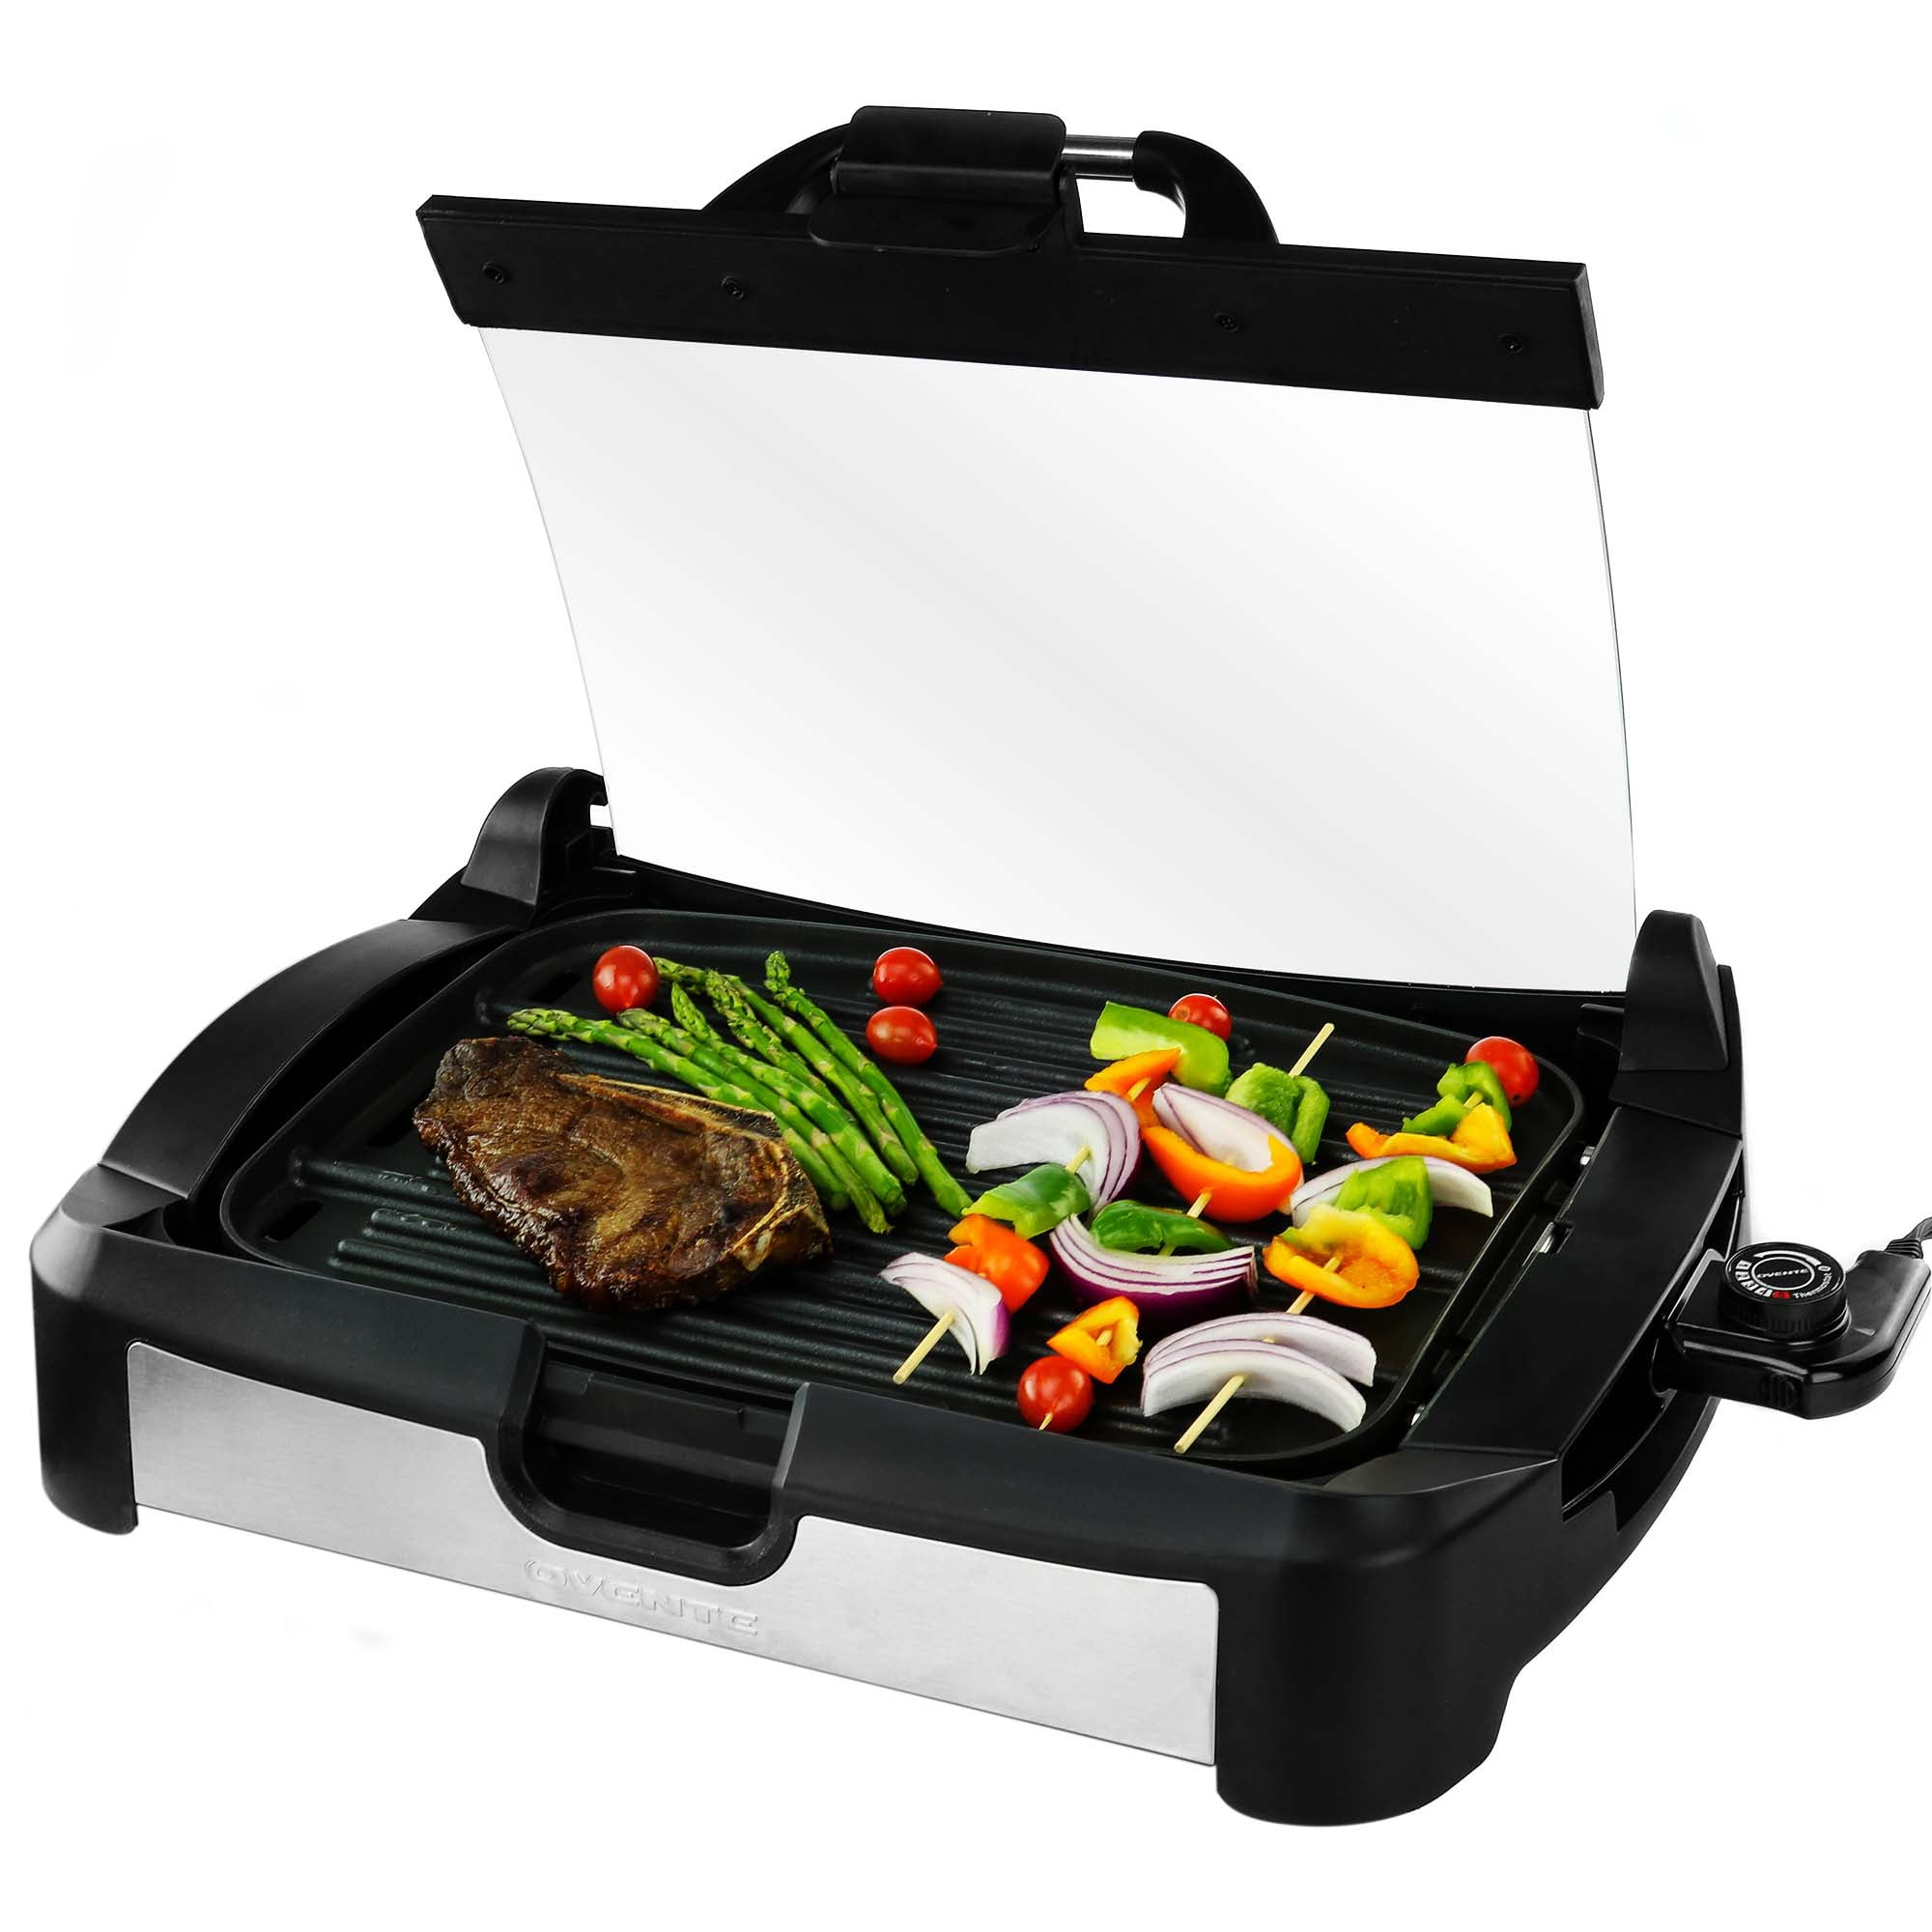 Ovente 2-in-1 Electric Grill and Griddle